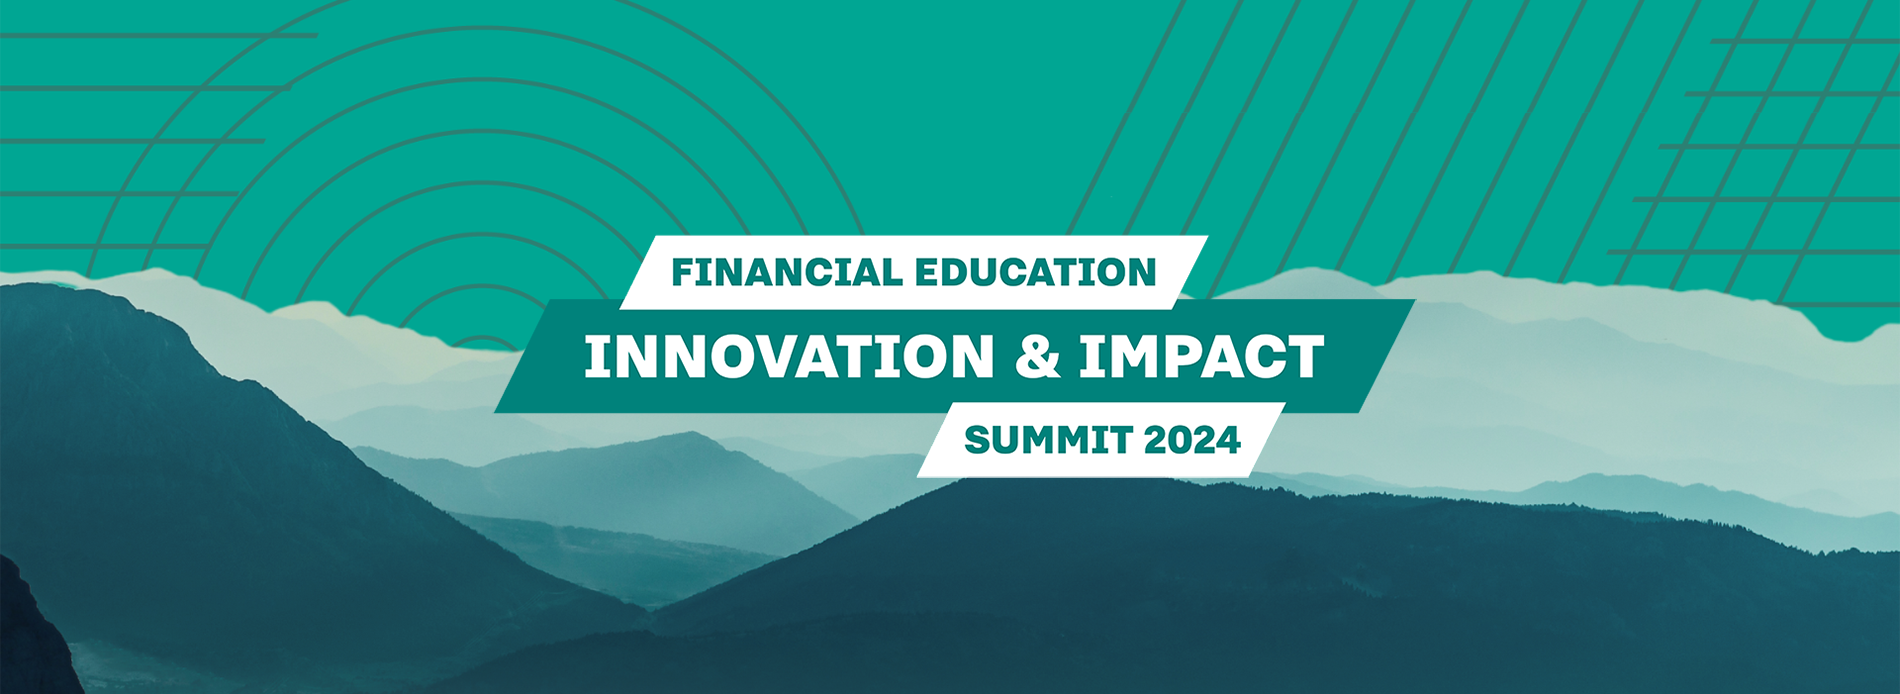 Summit 2024 logo with green background and mountains